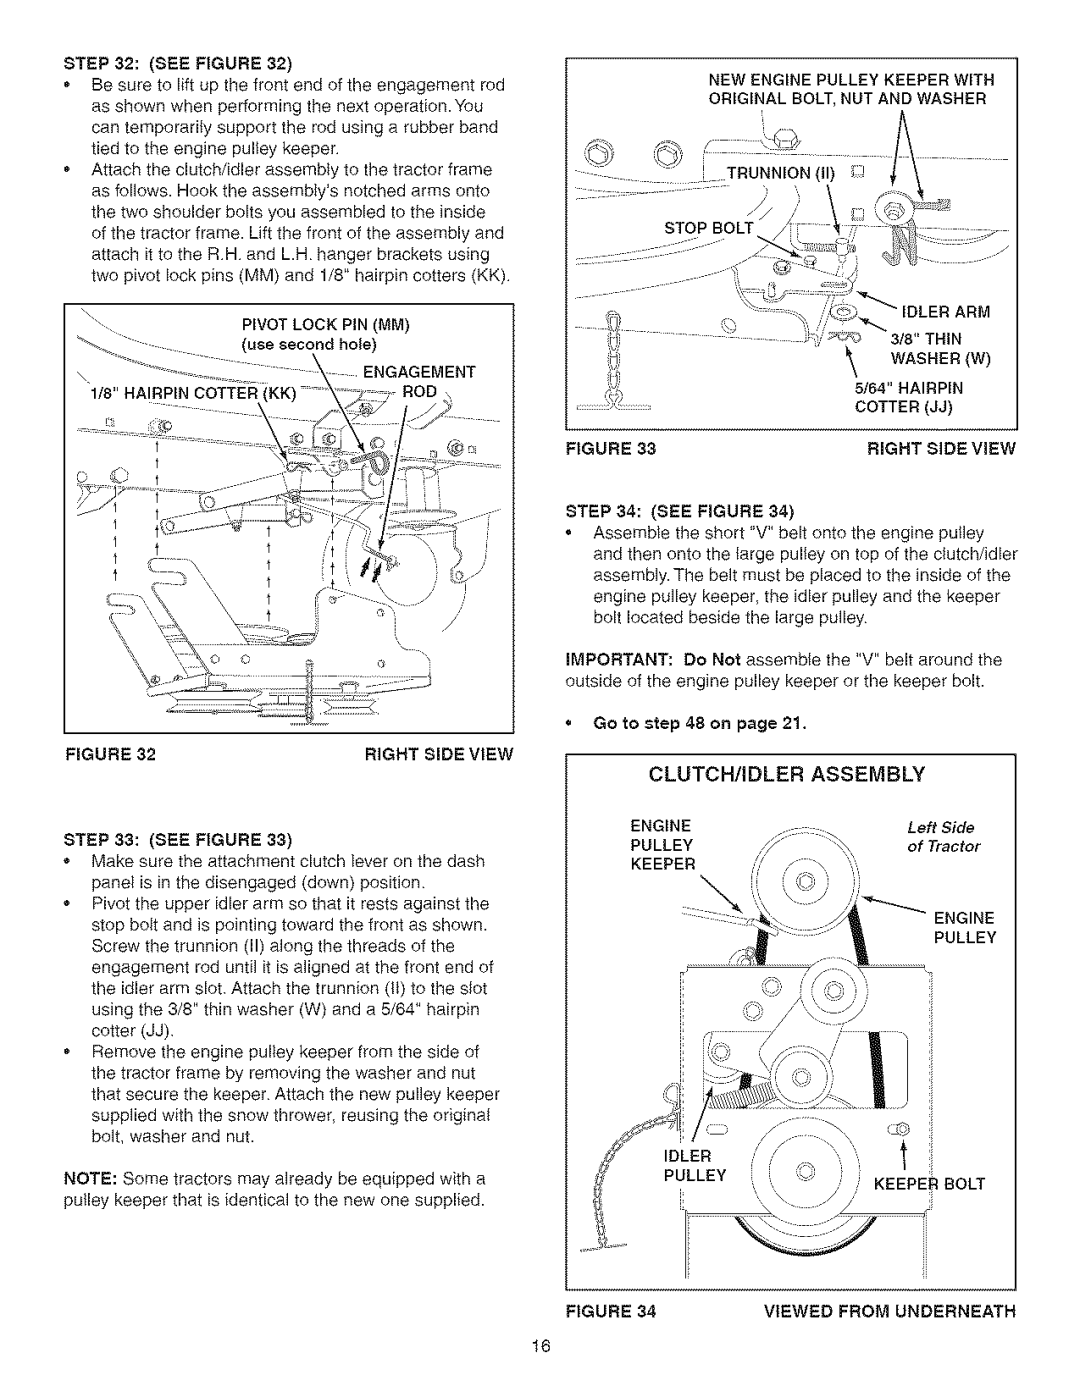 Craftsman 486.24838 manual See Figure, Go to on page 